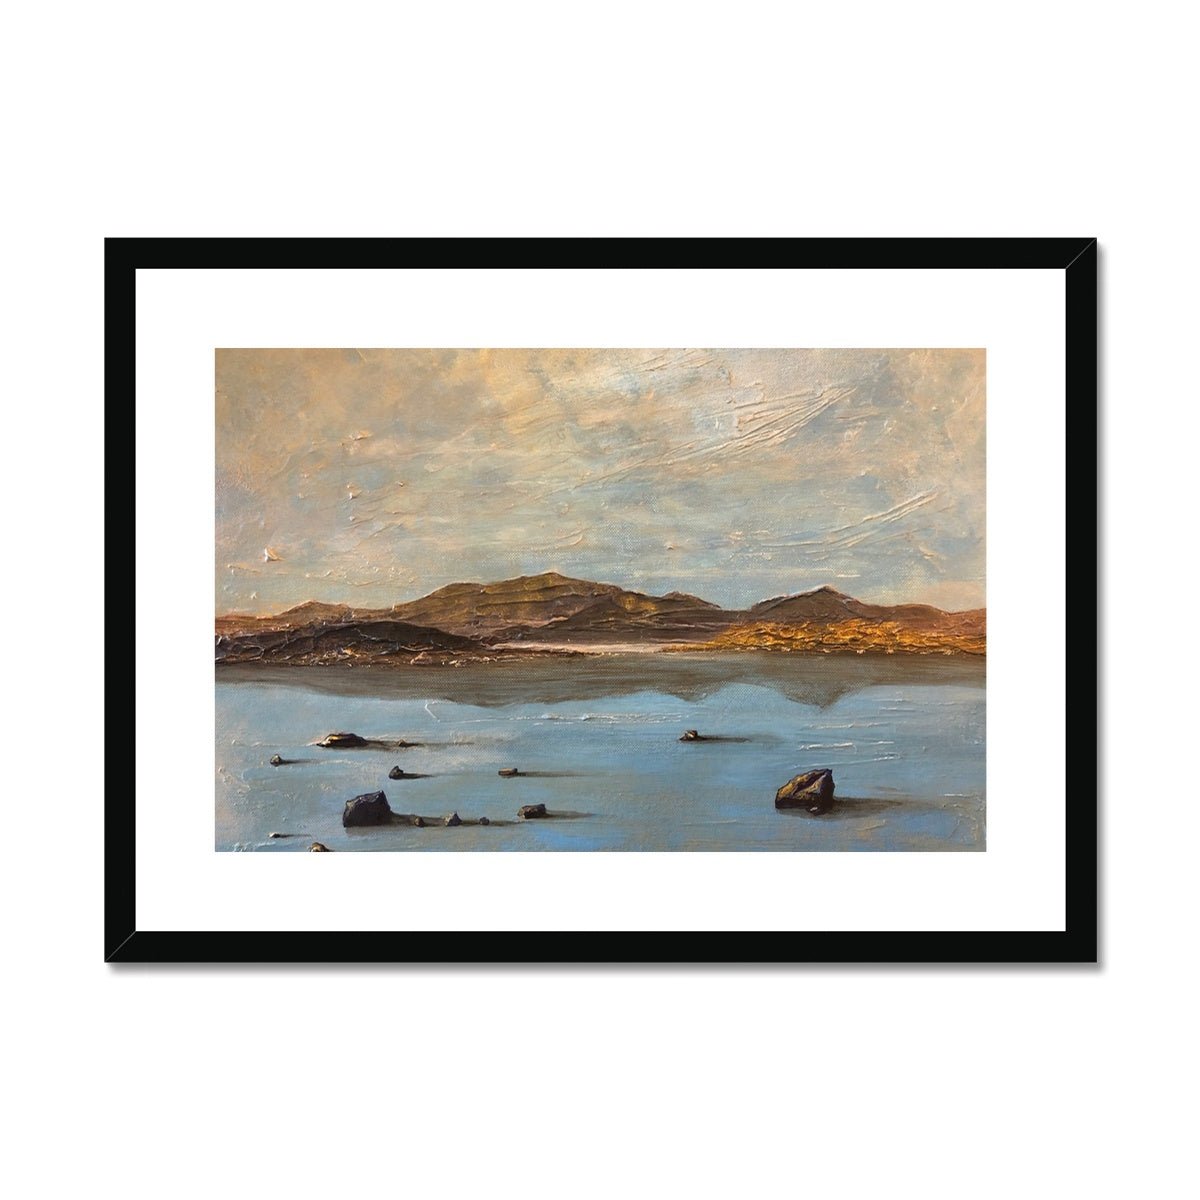 Loch Druidibeg South Uist Painting | Framed & Mounted Prints From Scotland-Framed & Mounted Prints-Scottish Lochs Art Gallery-A2 Landscape-Black Frame-Paintings, Prints, Homeware, Art Gifts From Scotland By Scottish Artist Kevin Hunter